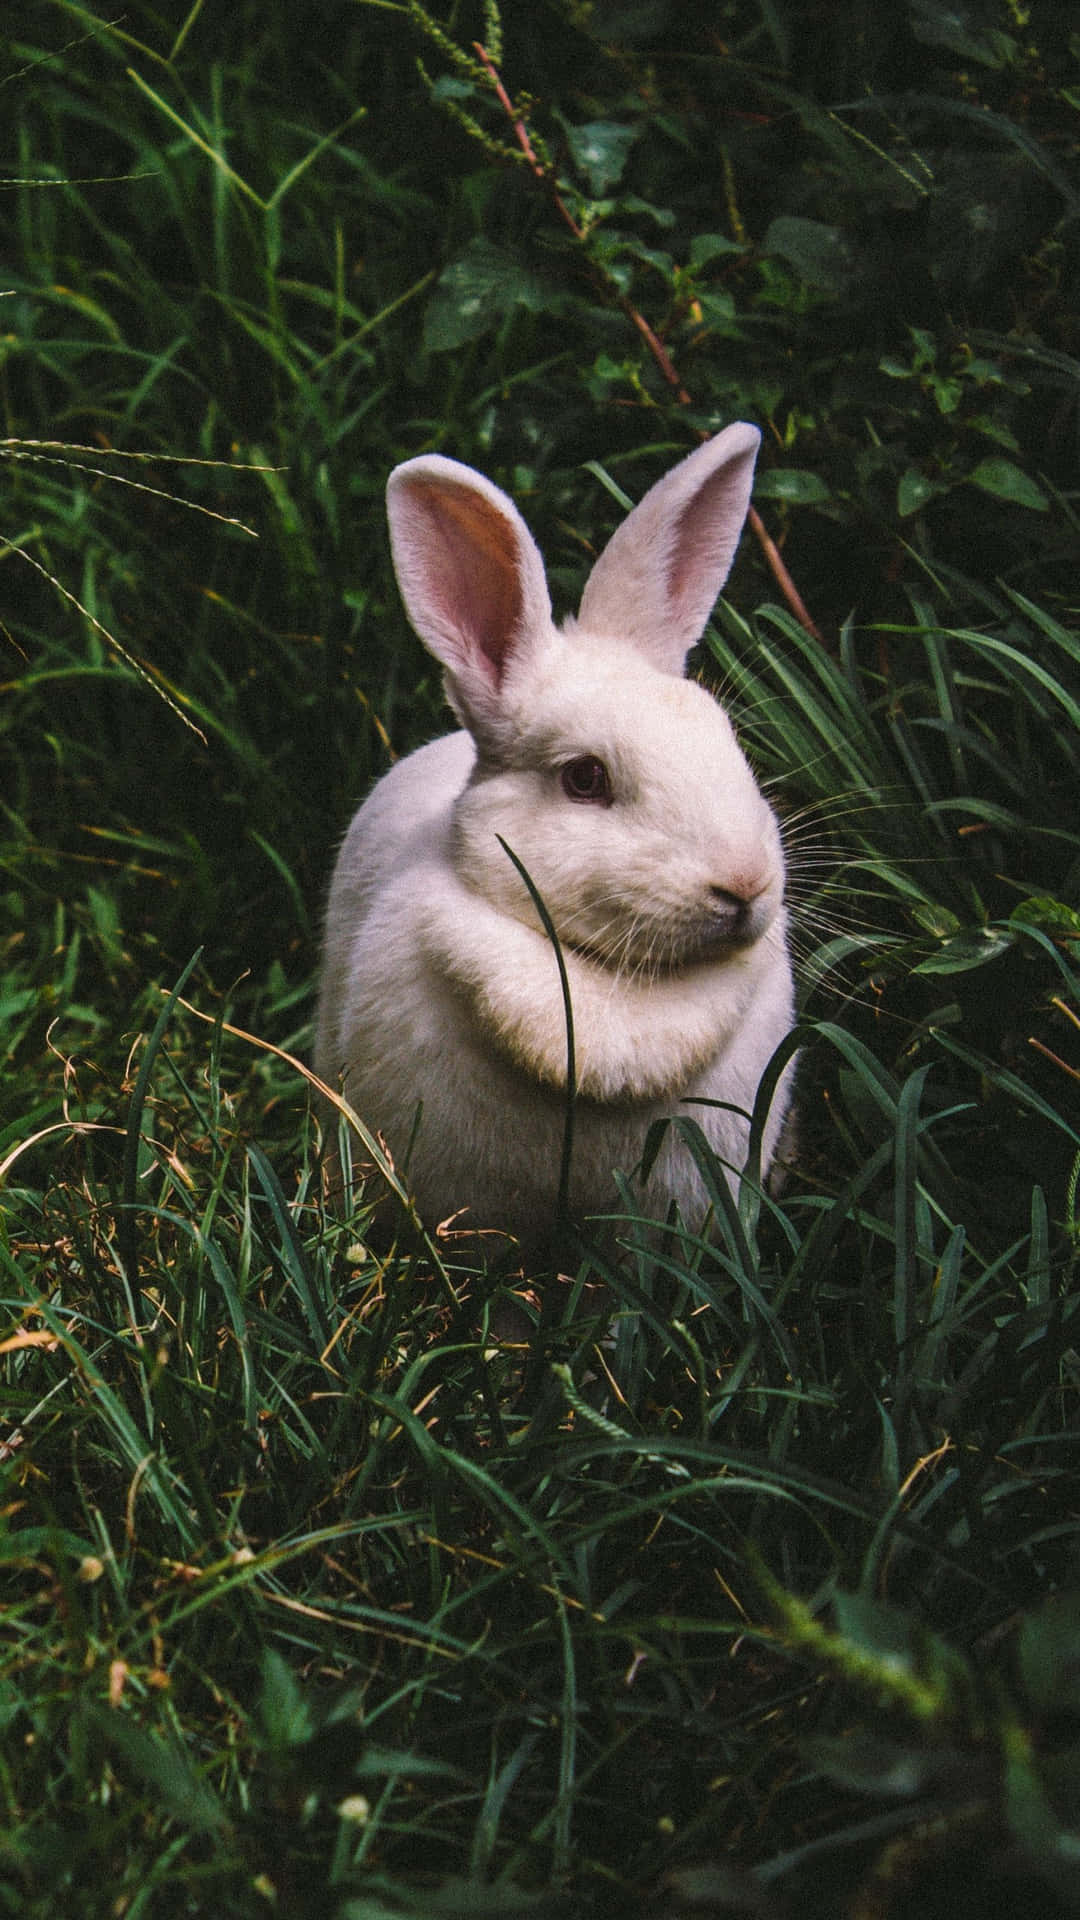 "Say hello to this cute bunny while you enjoy your iPhone!" Wallpaper